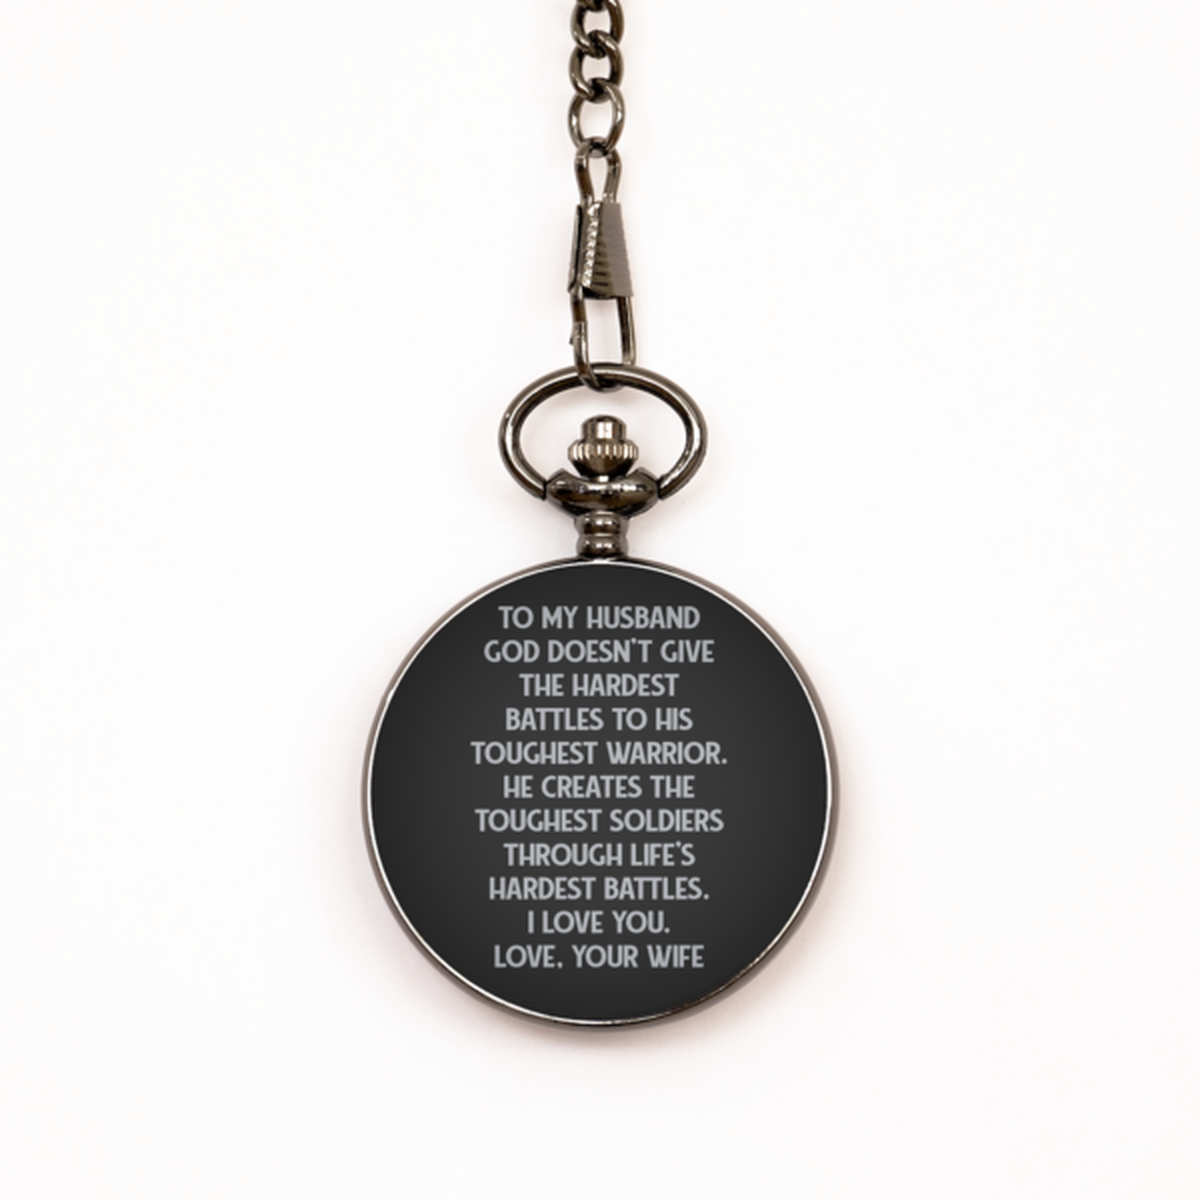 To My Husband Black Pocket Watch, God Creates The Toughest Soldiers, Anniversary Gifts For Husband From Wife, Birthday Gifts For Men